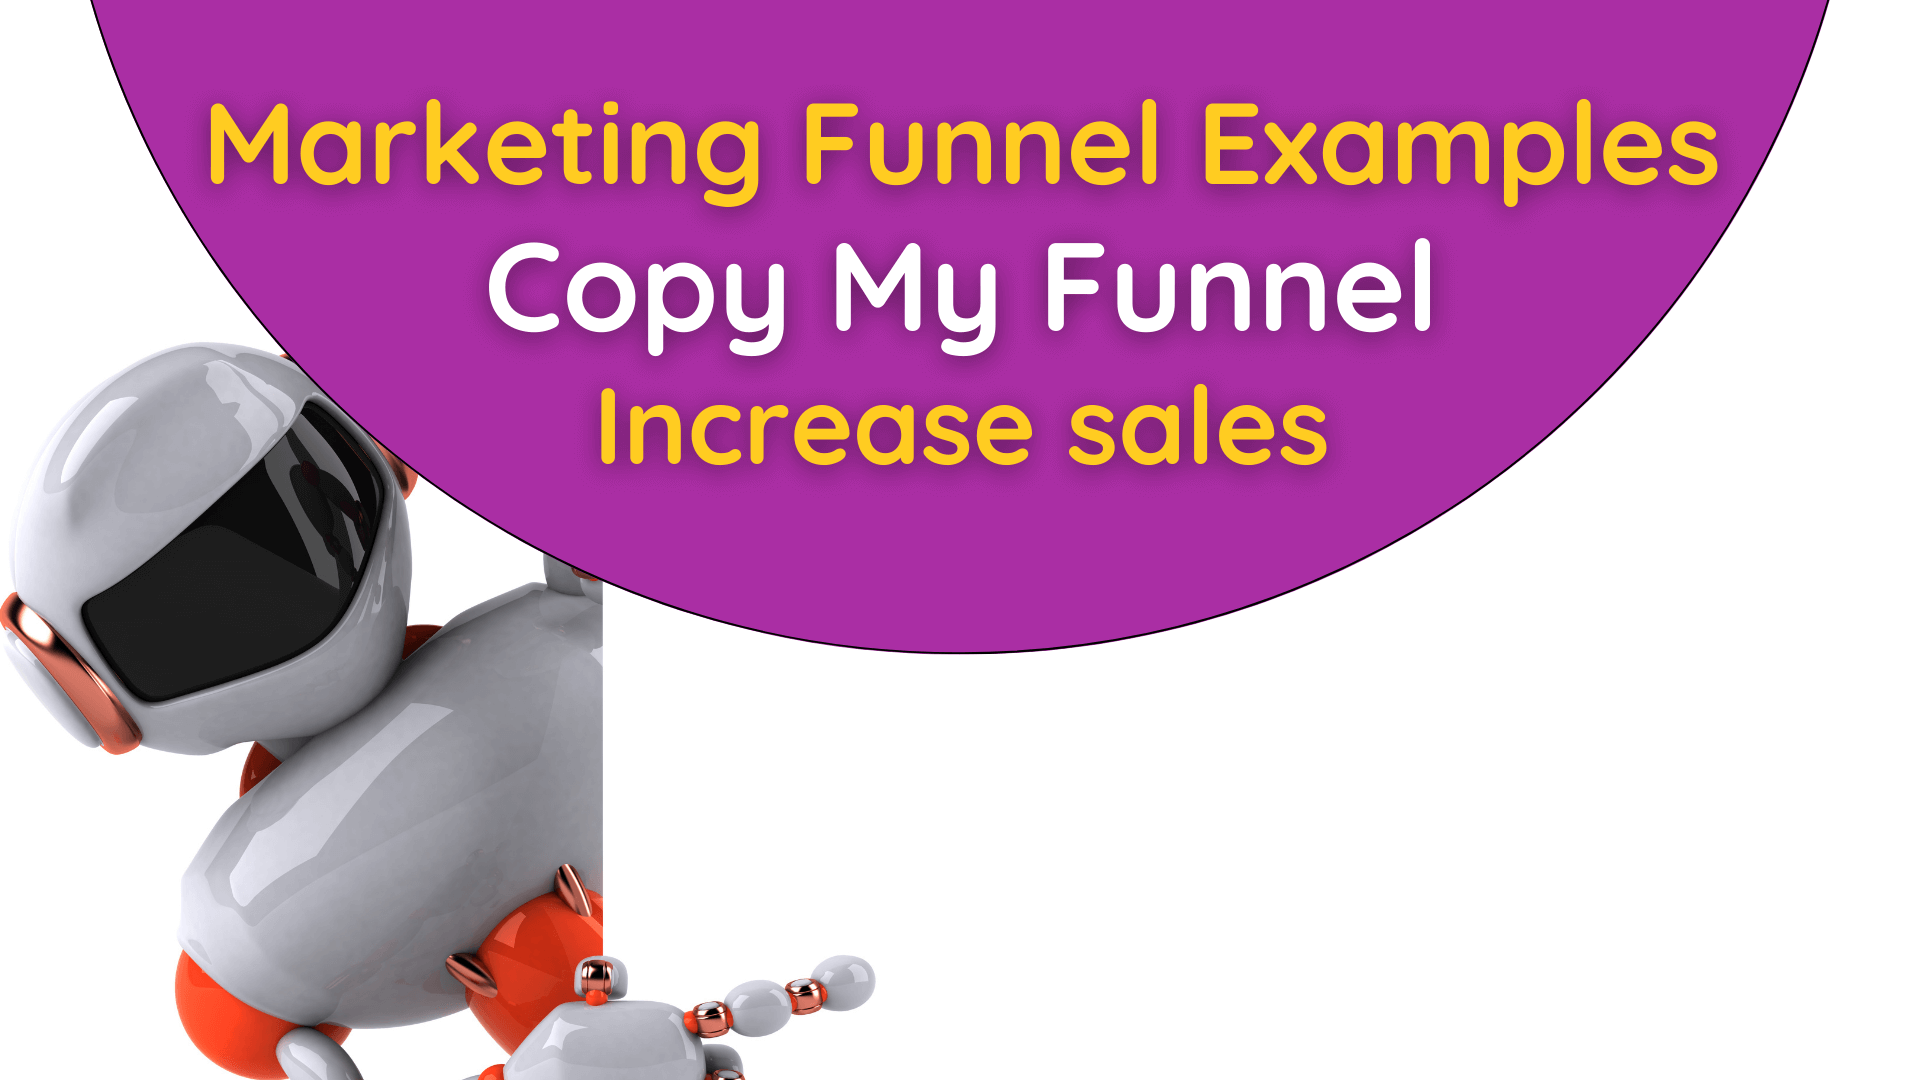 marketing funnel examples